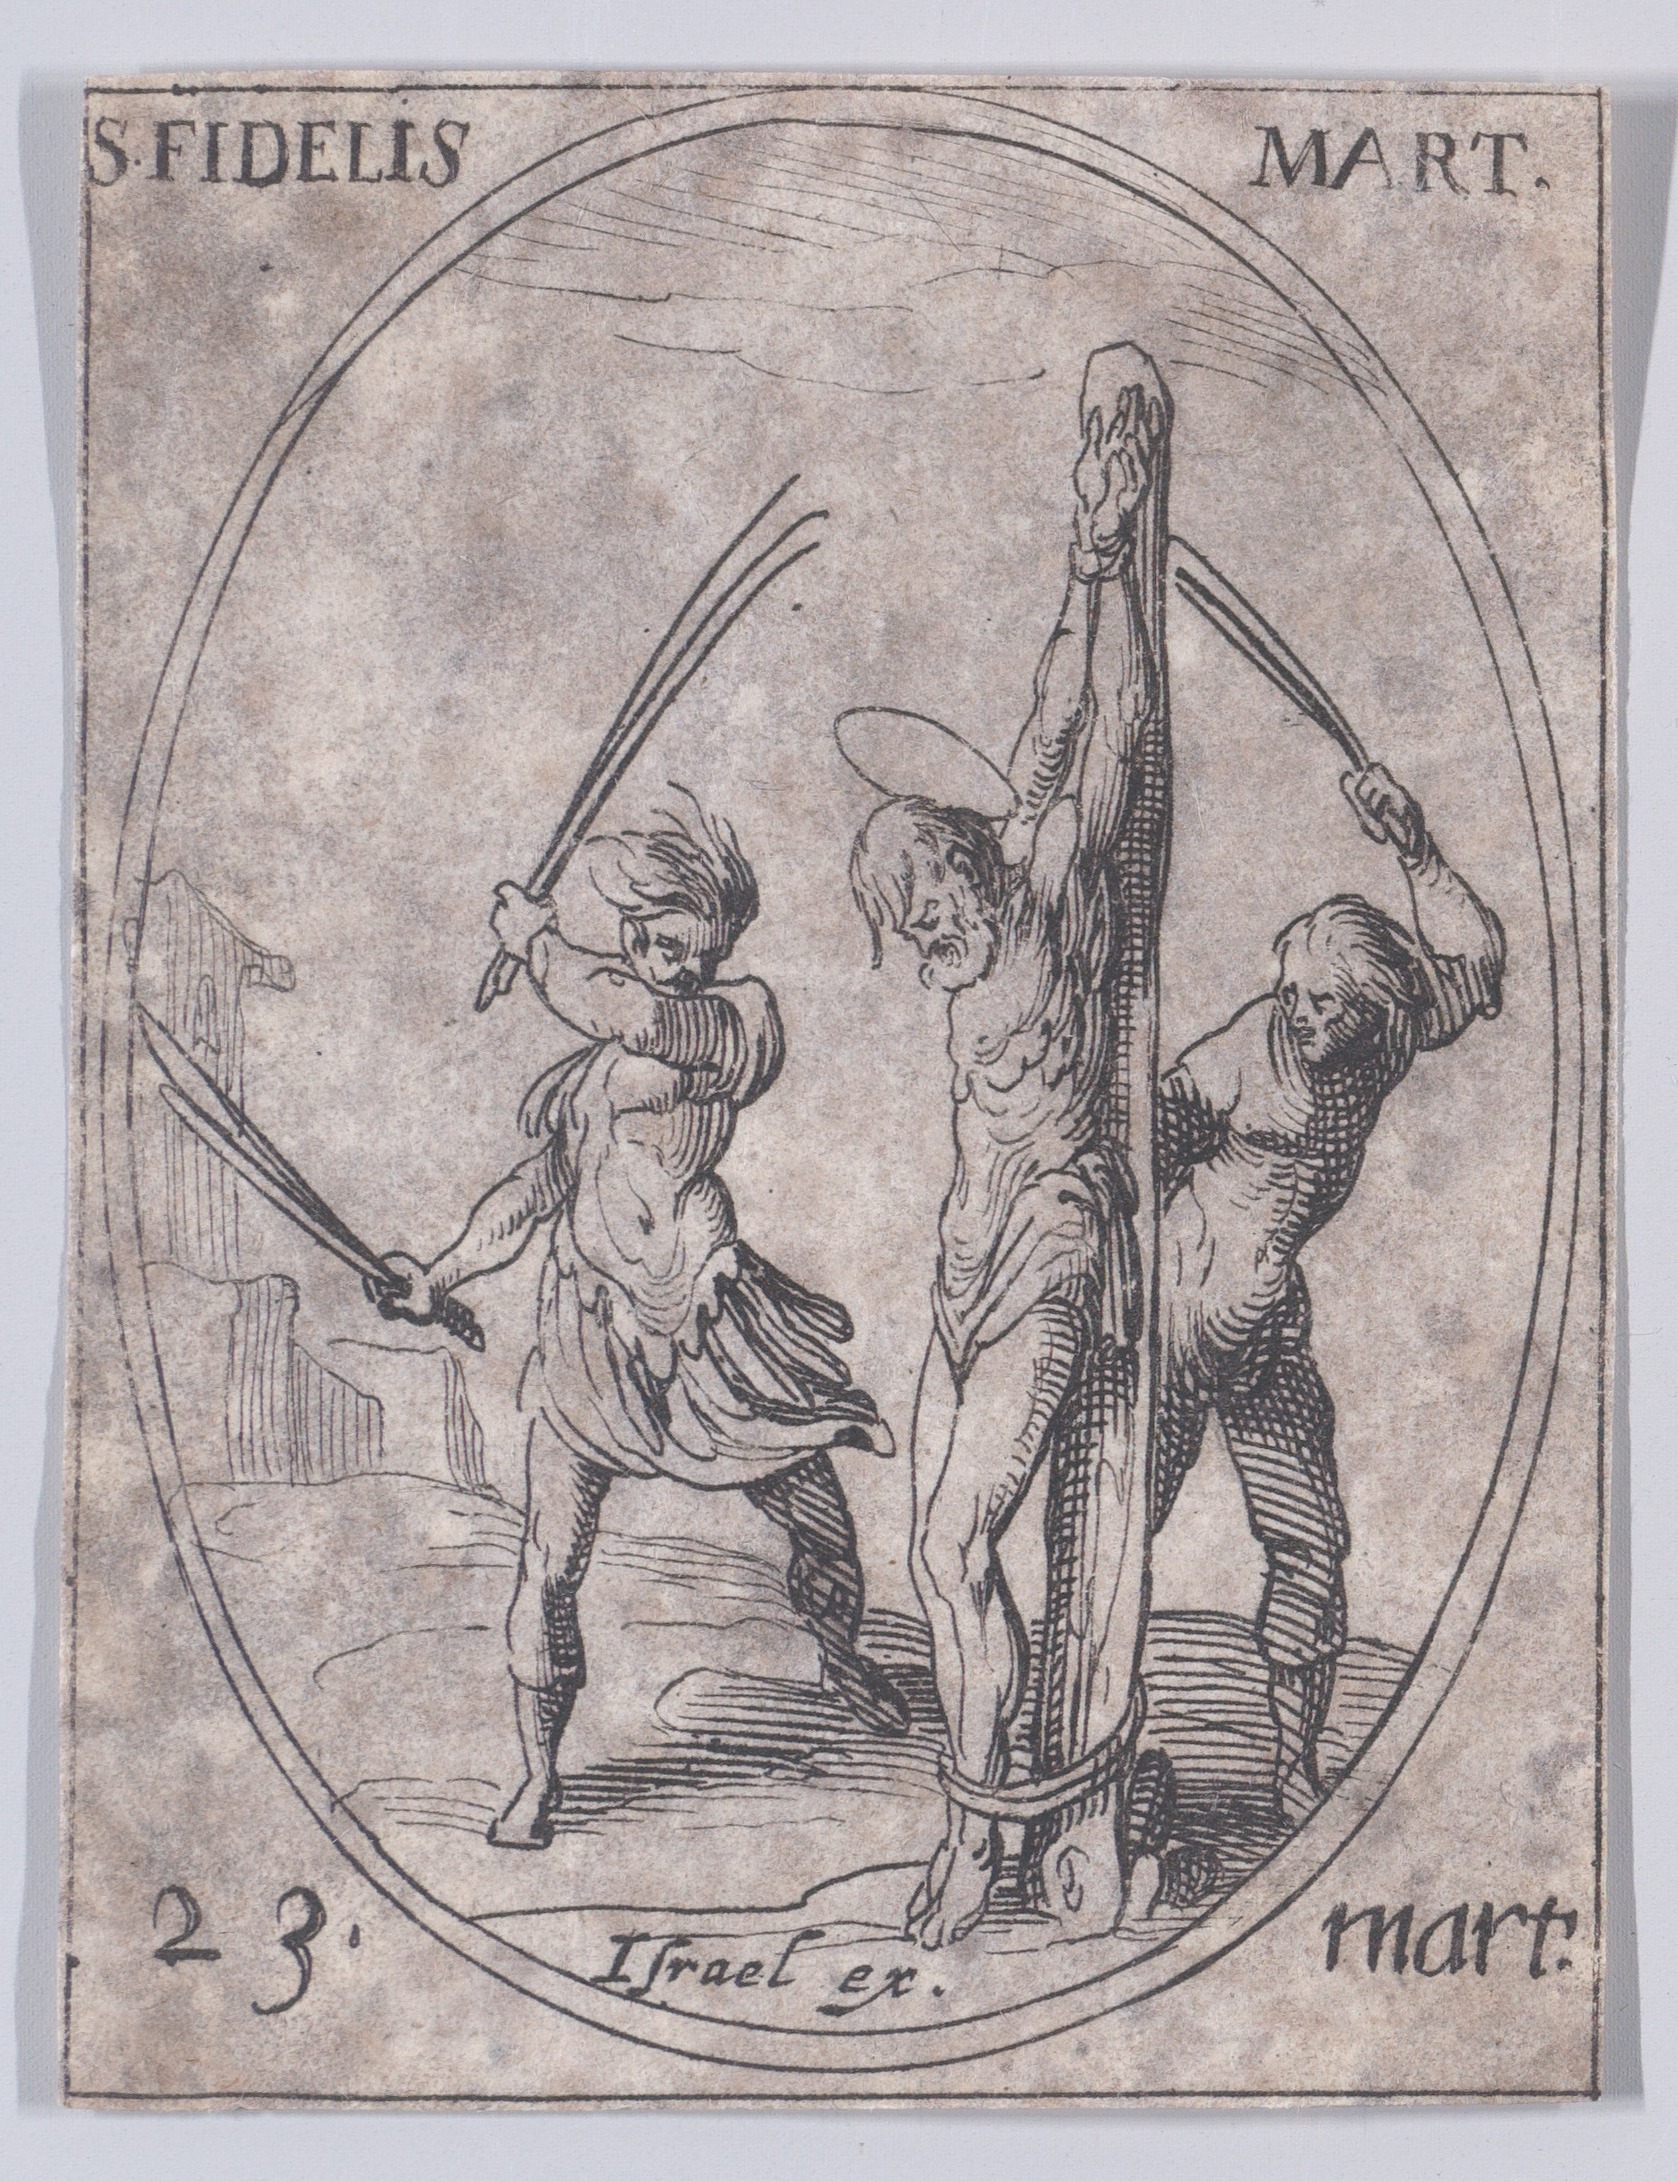 S. Fidèle, martyr (St. Fideles, Martyr), March 23rd, from Les Images De Tous Les Saincts et Saintes de L'Année (Images of All of the Saints and Religious Events of the Year), Jacques Callot (French, Nancy 1592–1635 Nancy), Etching; second state of two (Lieure)